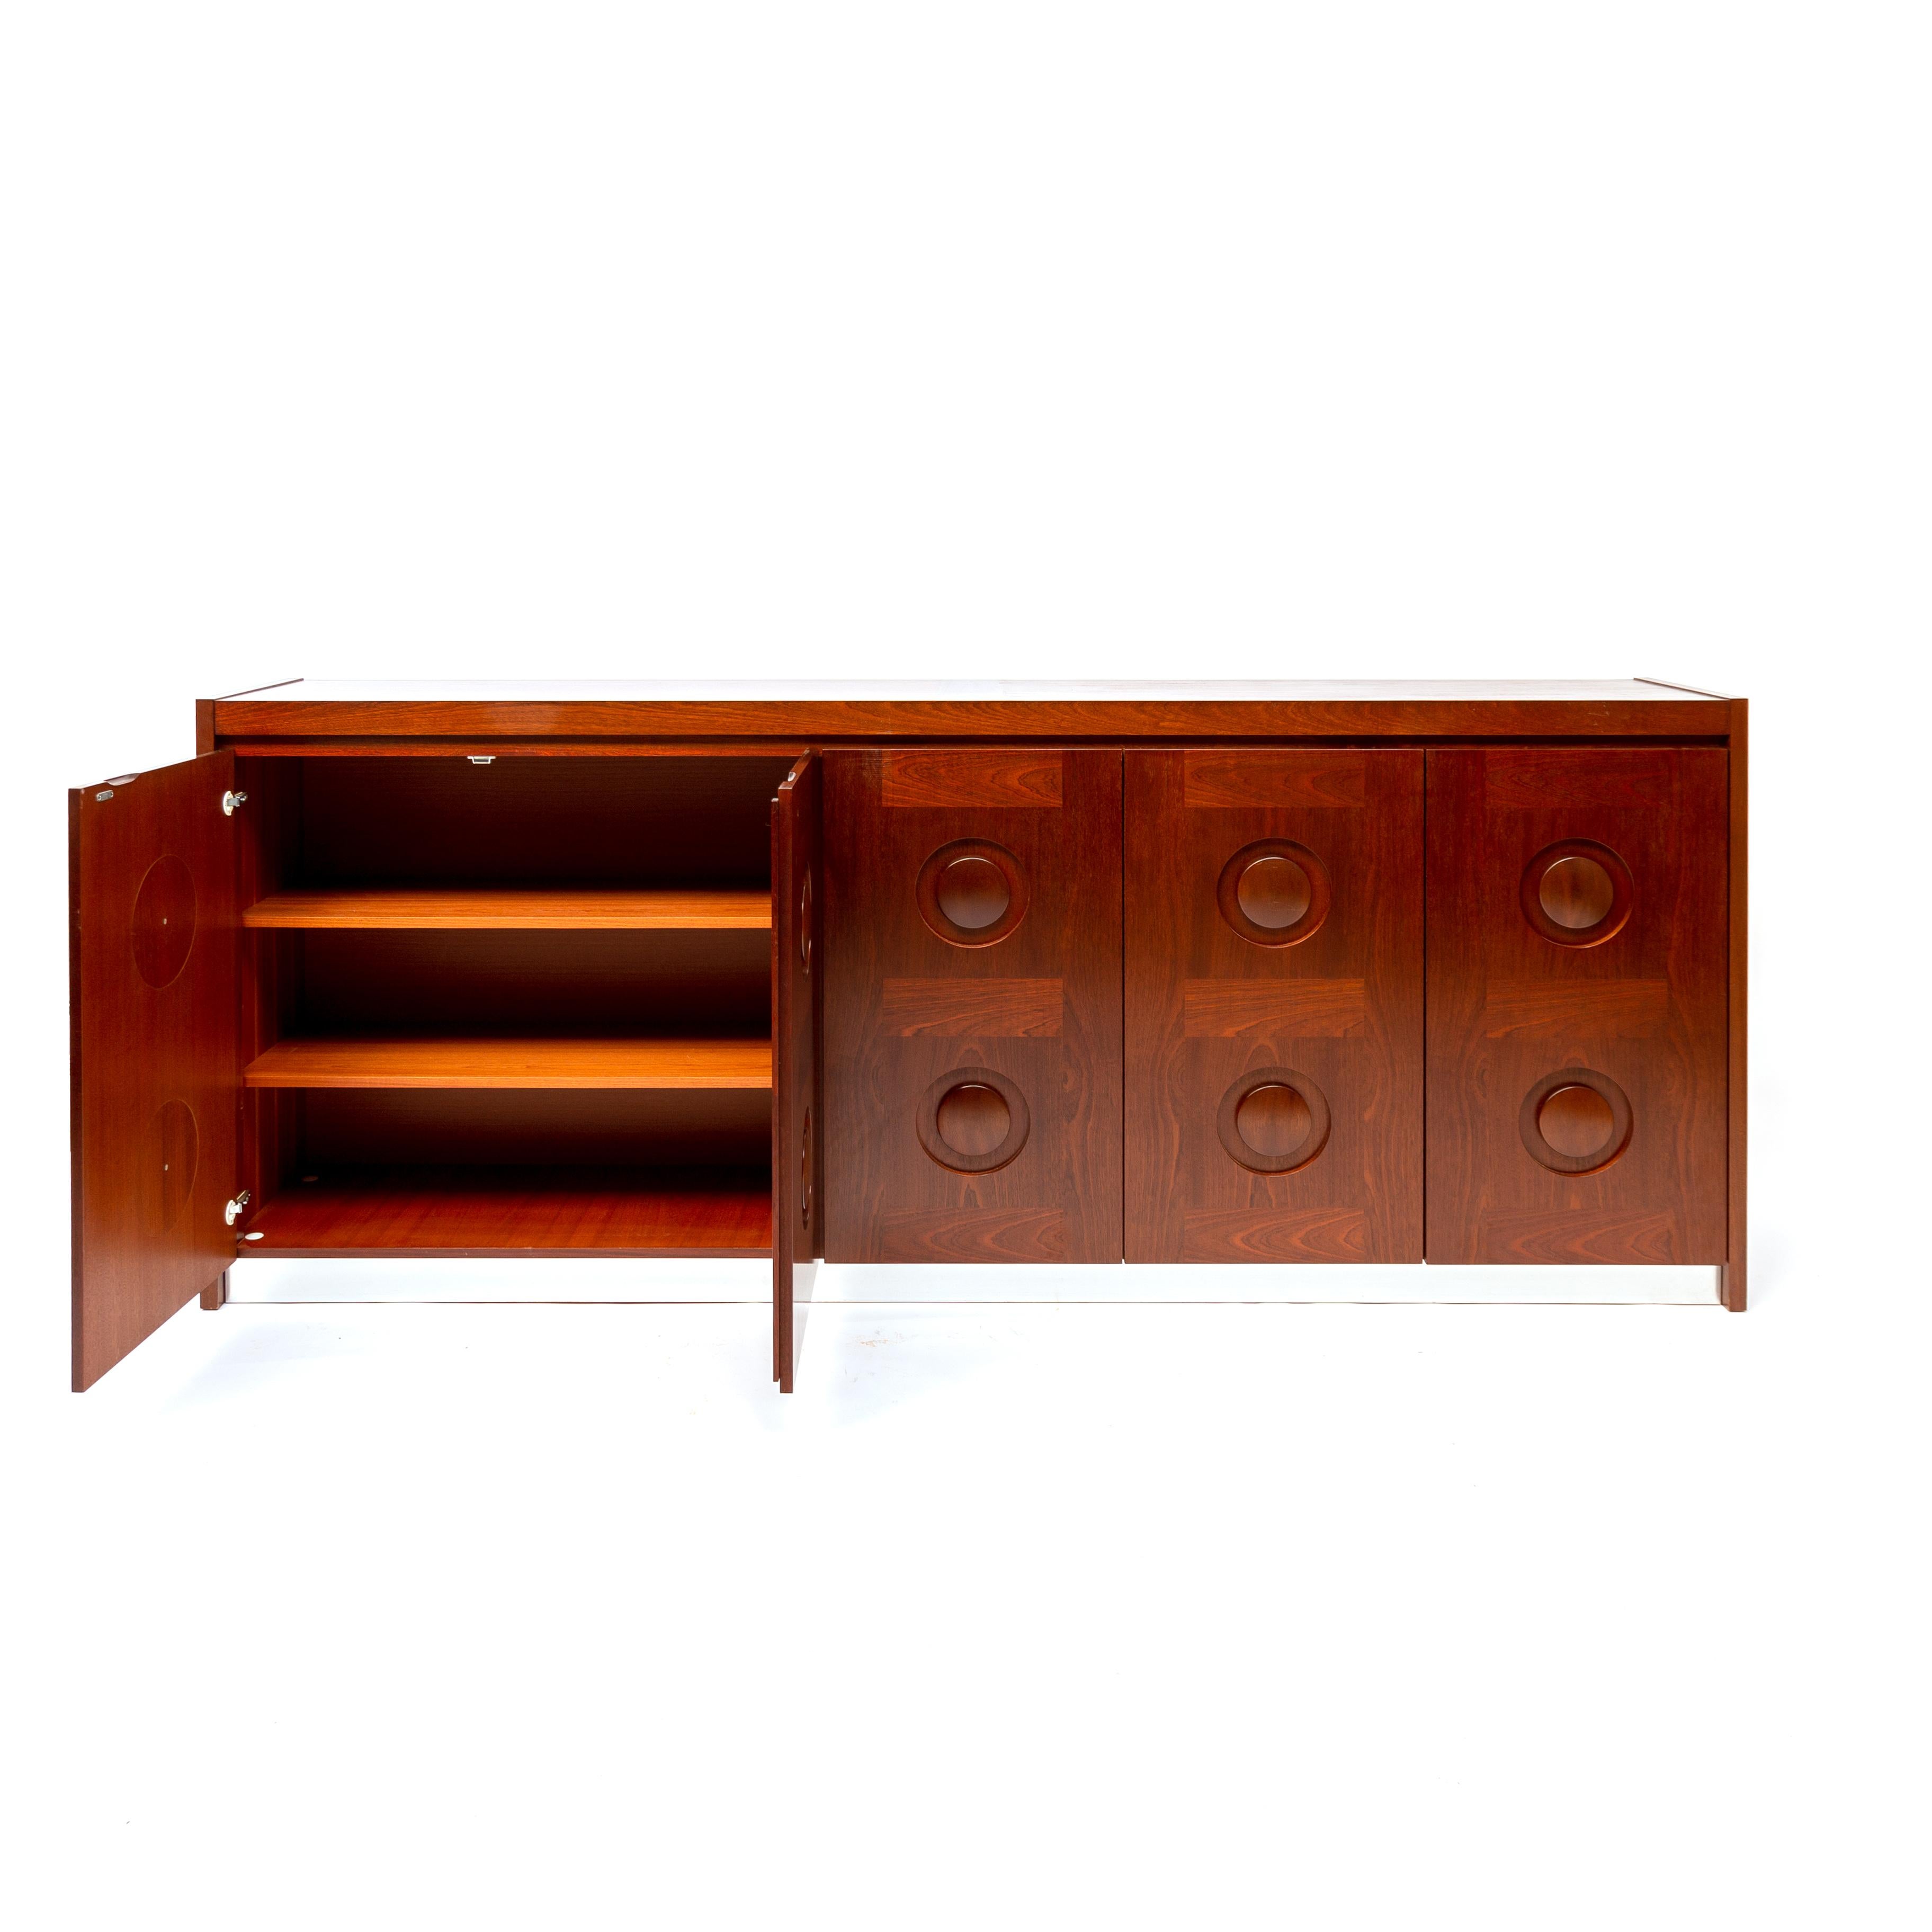 Minimalist/Mid-Century Modern/Brutalist piece that fits well in an eclectic chic interior. This large sideboard with geometric doors is made in Belgium in the 1970s. The credenza shows a round pattern on its doors. This cabinet looks fantastic, with